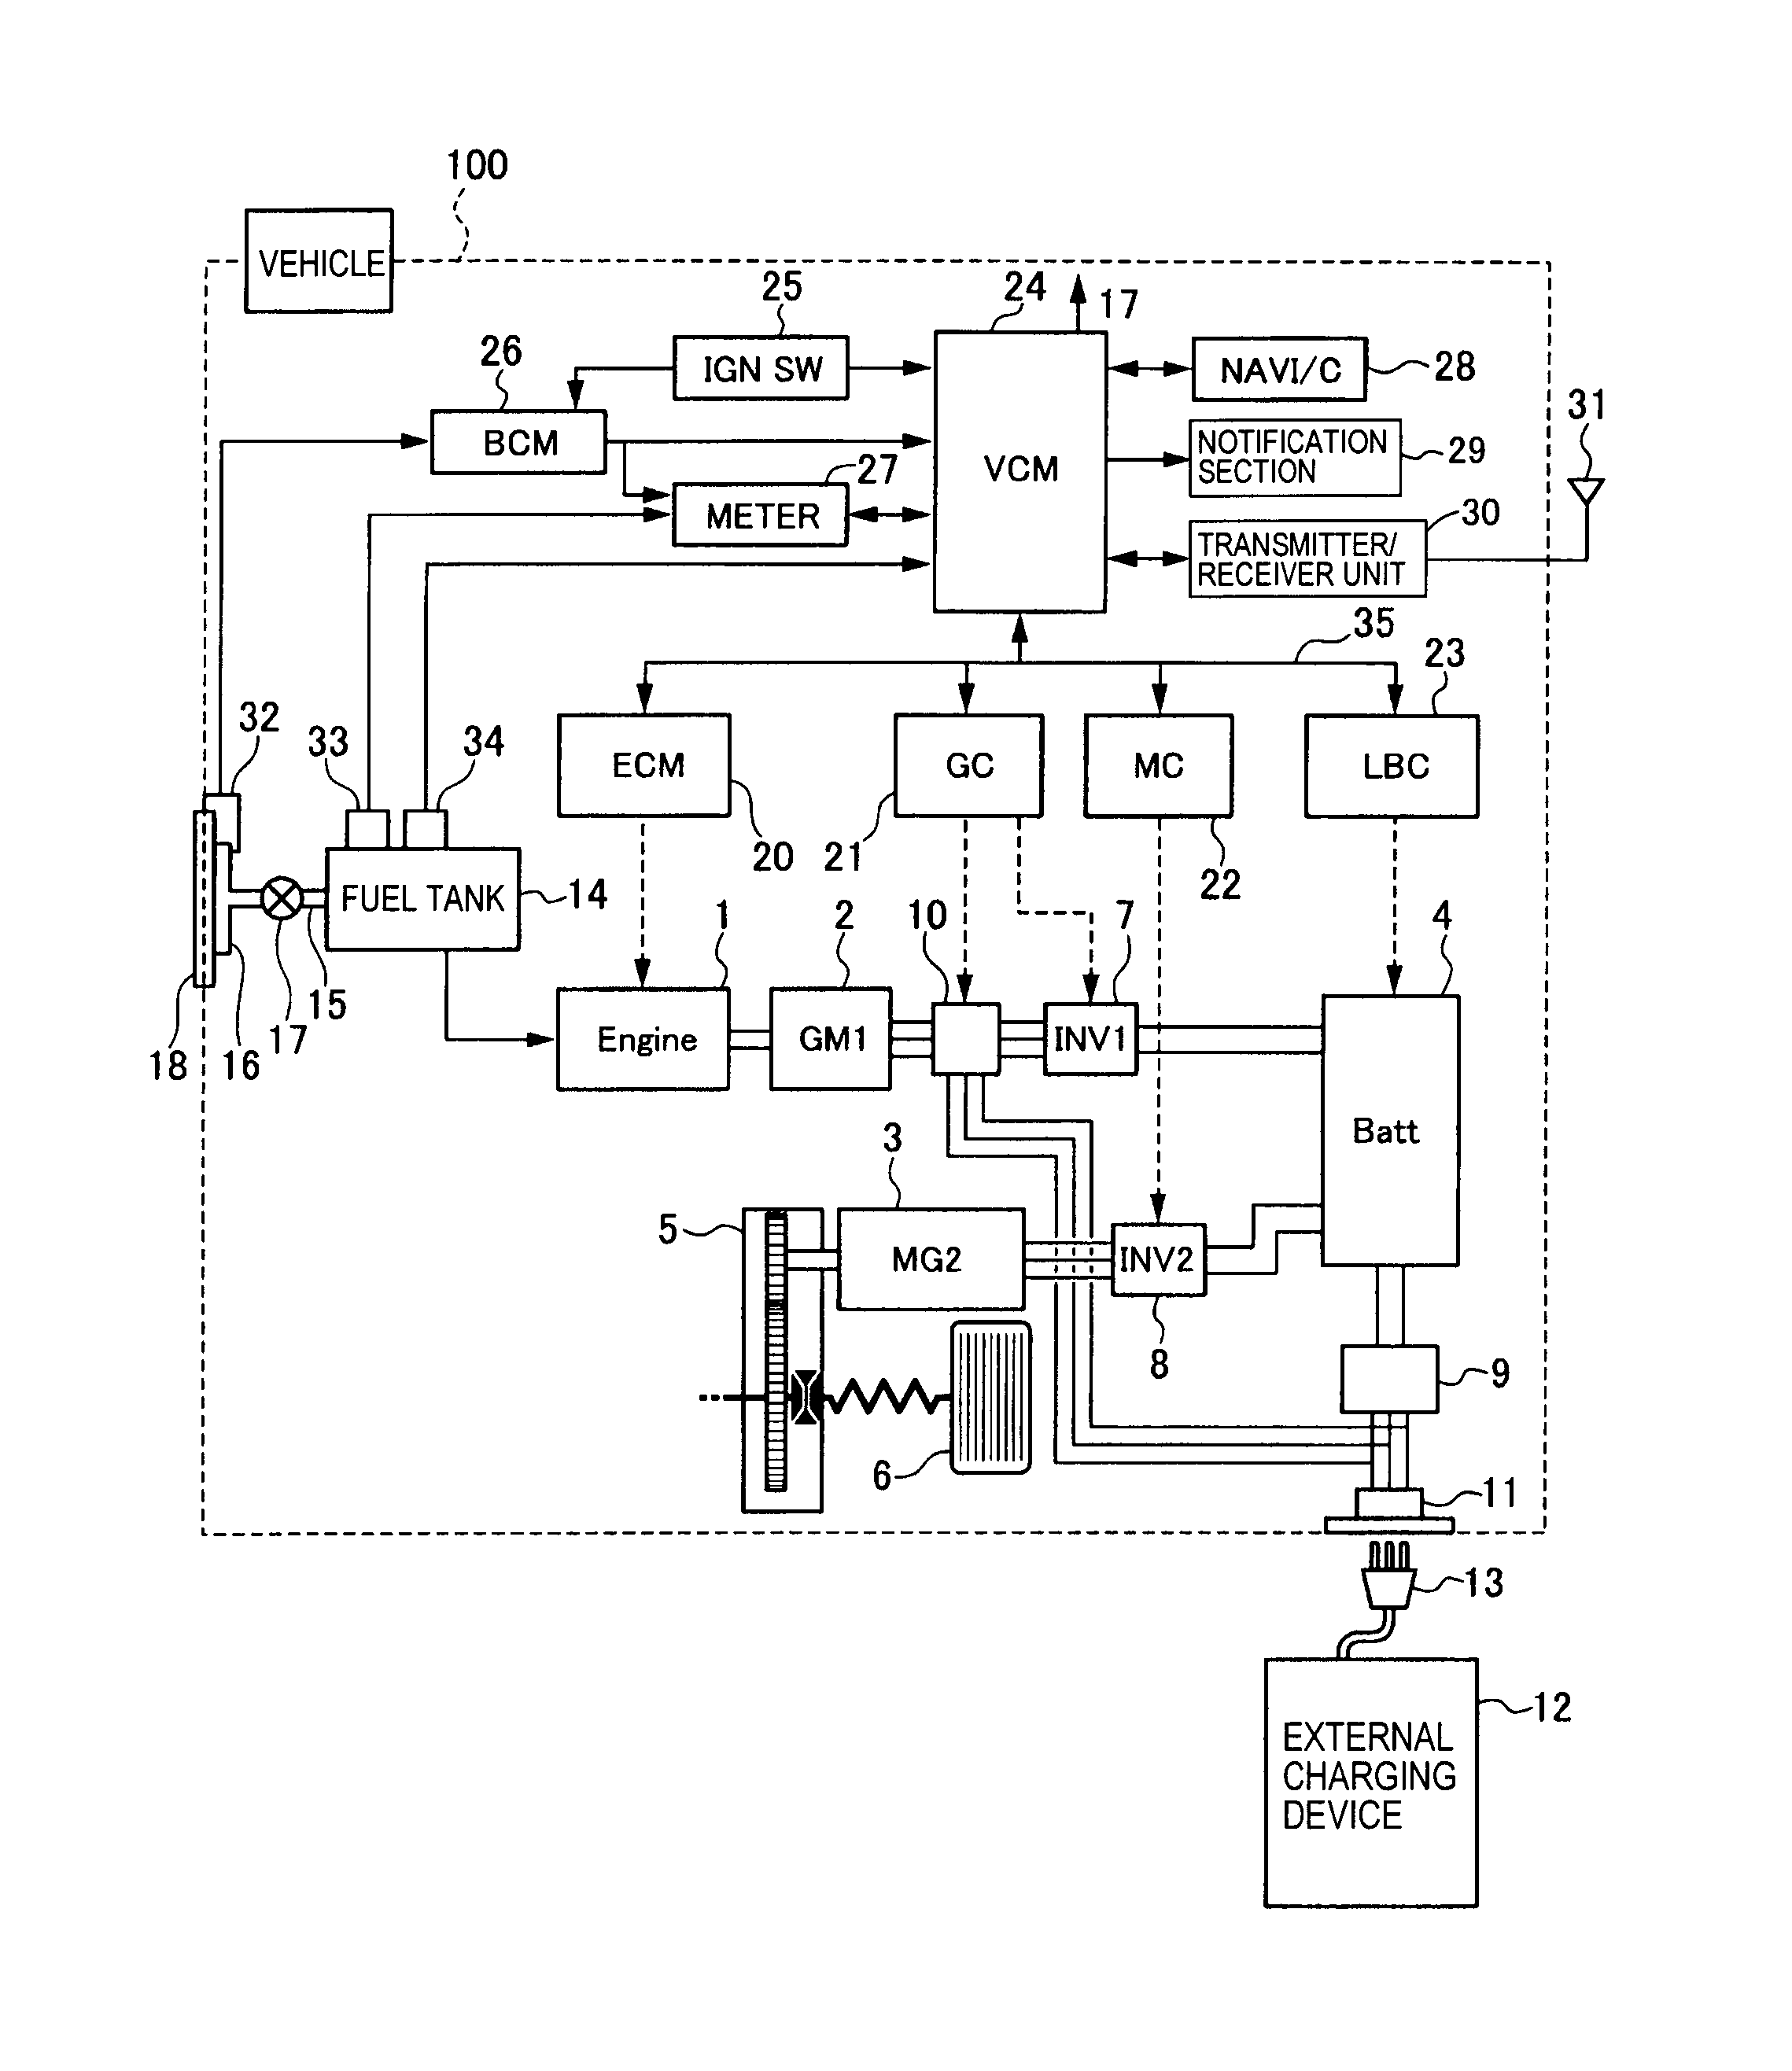 hoover windtunnel t series parts diagram